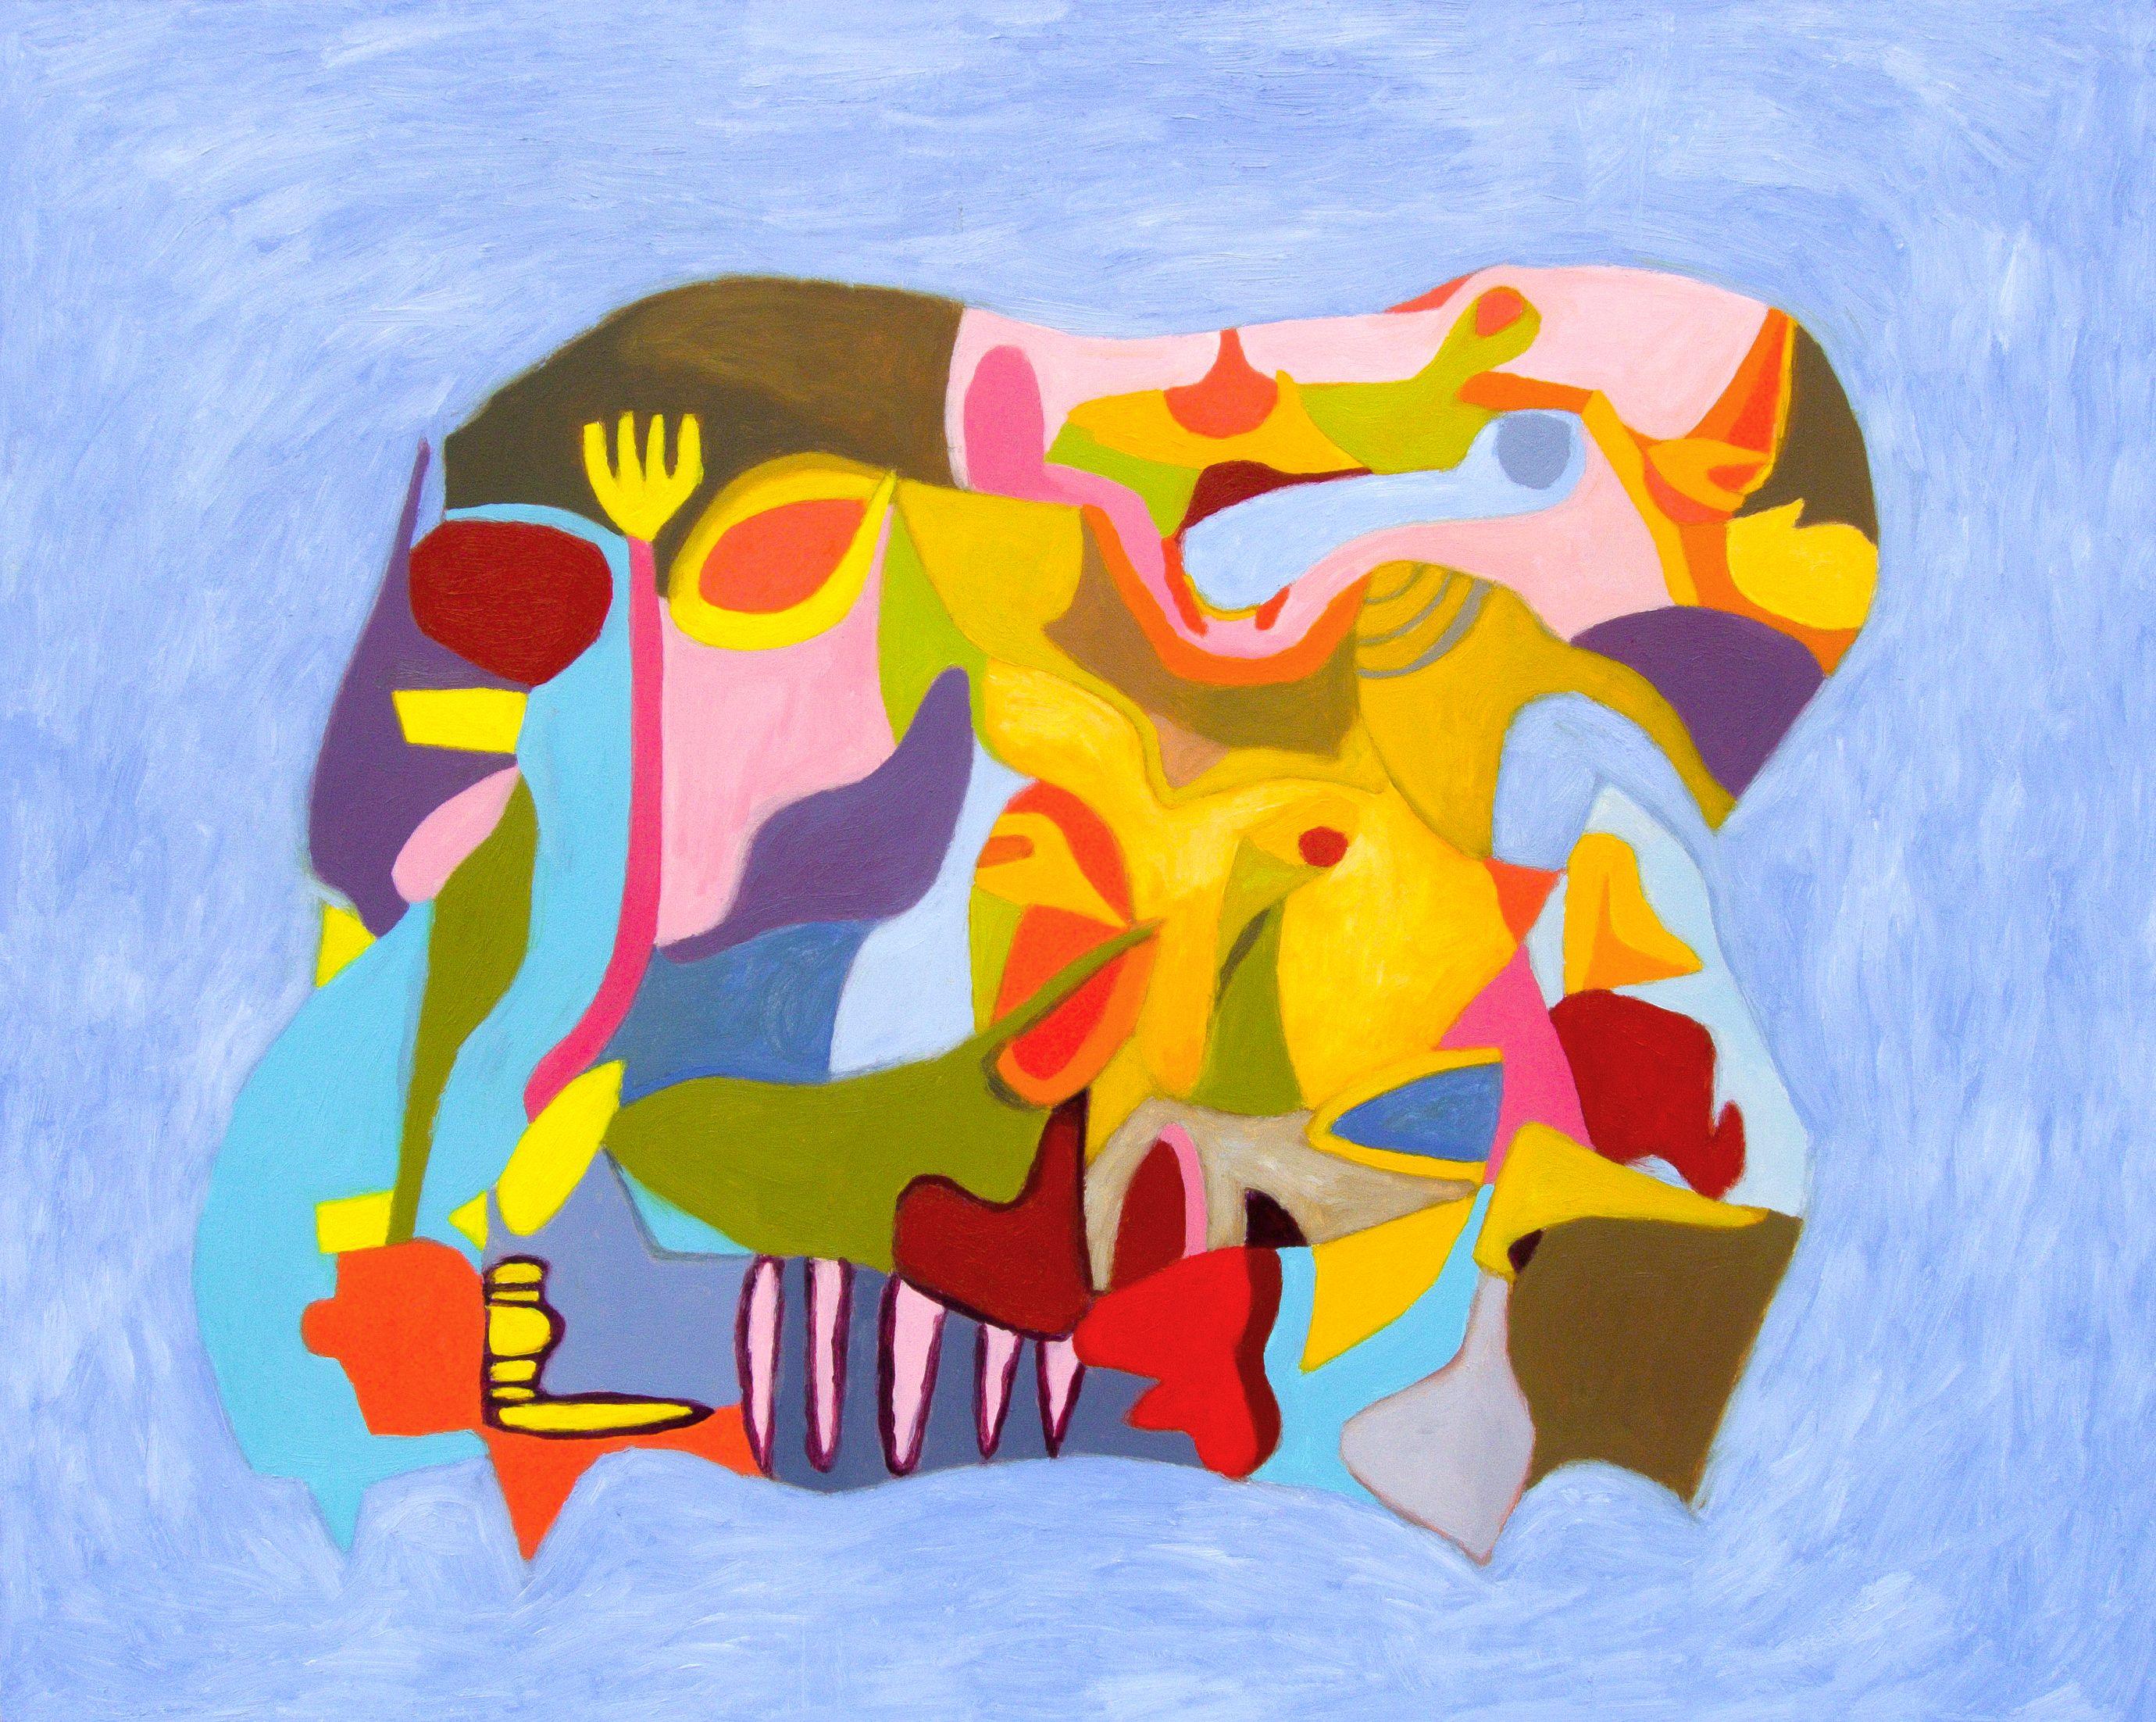 Earthly Flavors is one of the twenty-odd pieces I did while participating in Palette 22 Restaurant's artist-in-residence program. Amorphous islands of yellow, pink and blue dominate the composition, and resemble tongues, teeth and noses. Among the